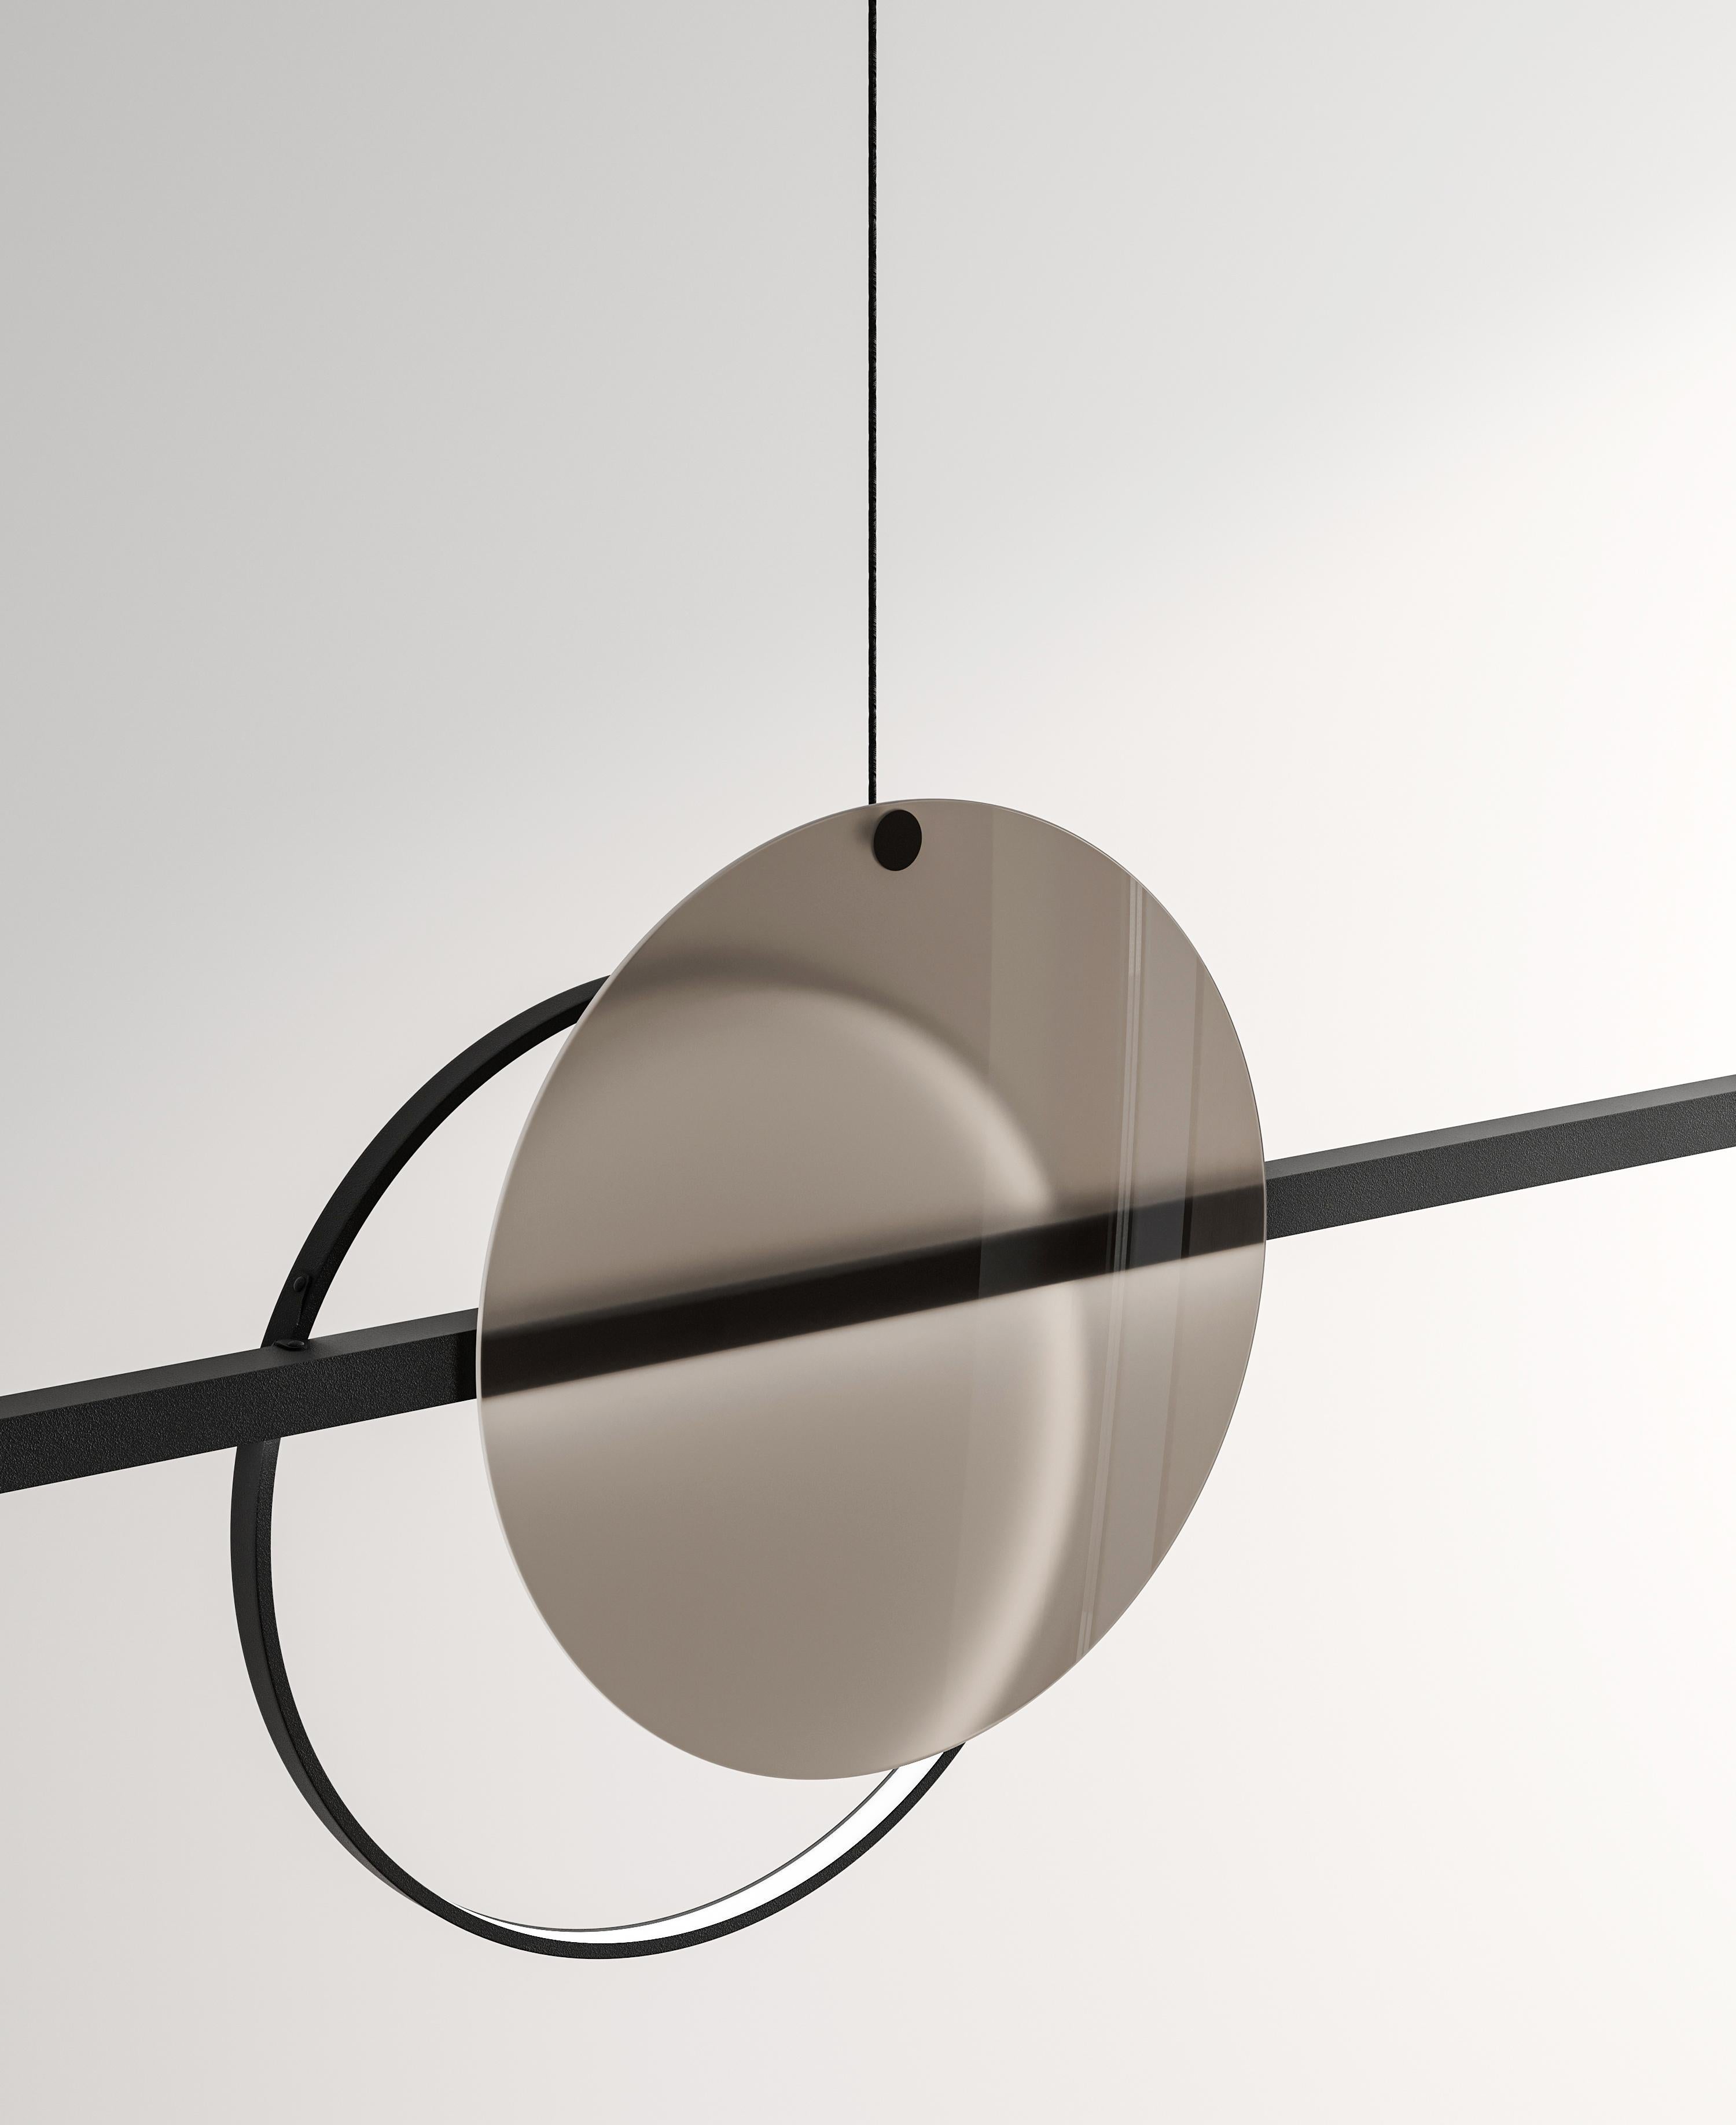 Hand-Crafted Minimalistic Ceiling Lamp Mid glass-1200, Glass Edition, Modern Style For Sale